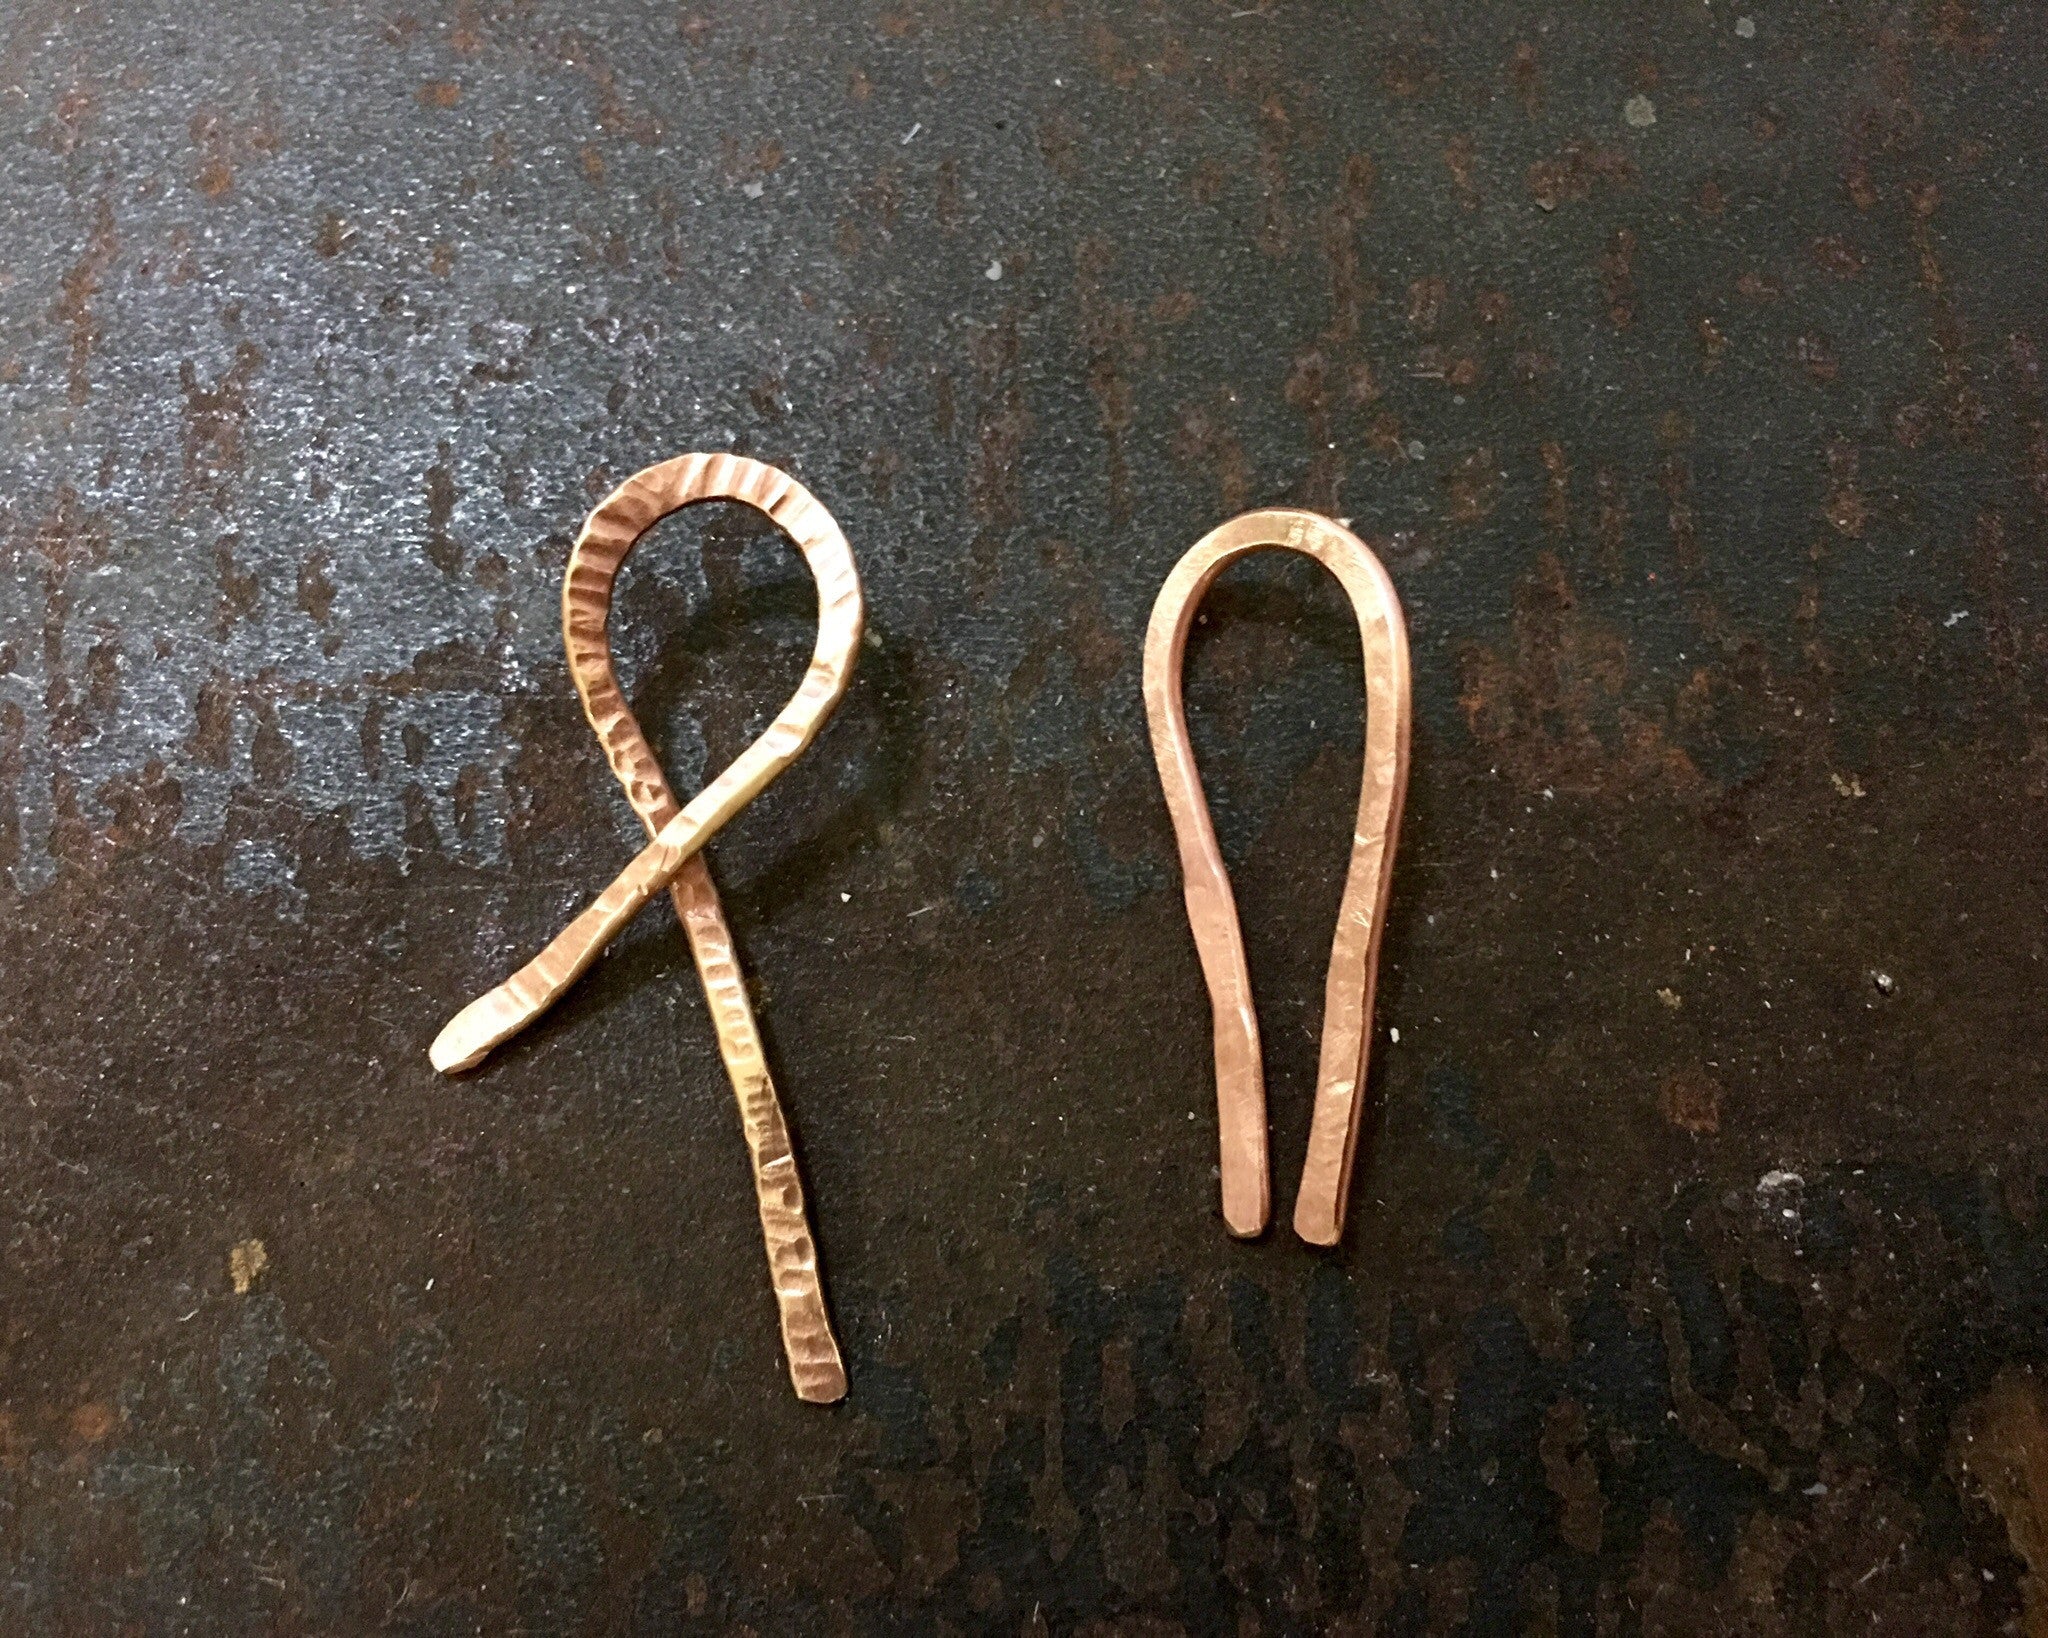 workshop / intro to working with metals + making HOOP or RIBBON EARRINGS